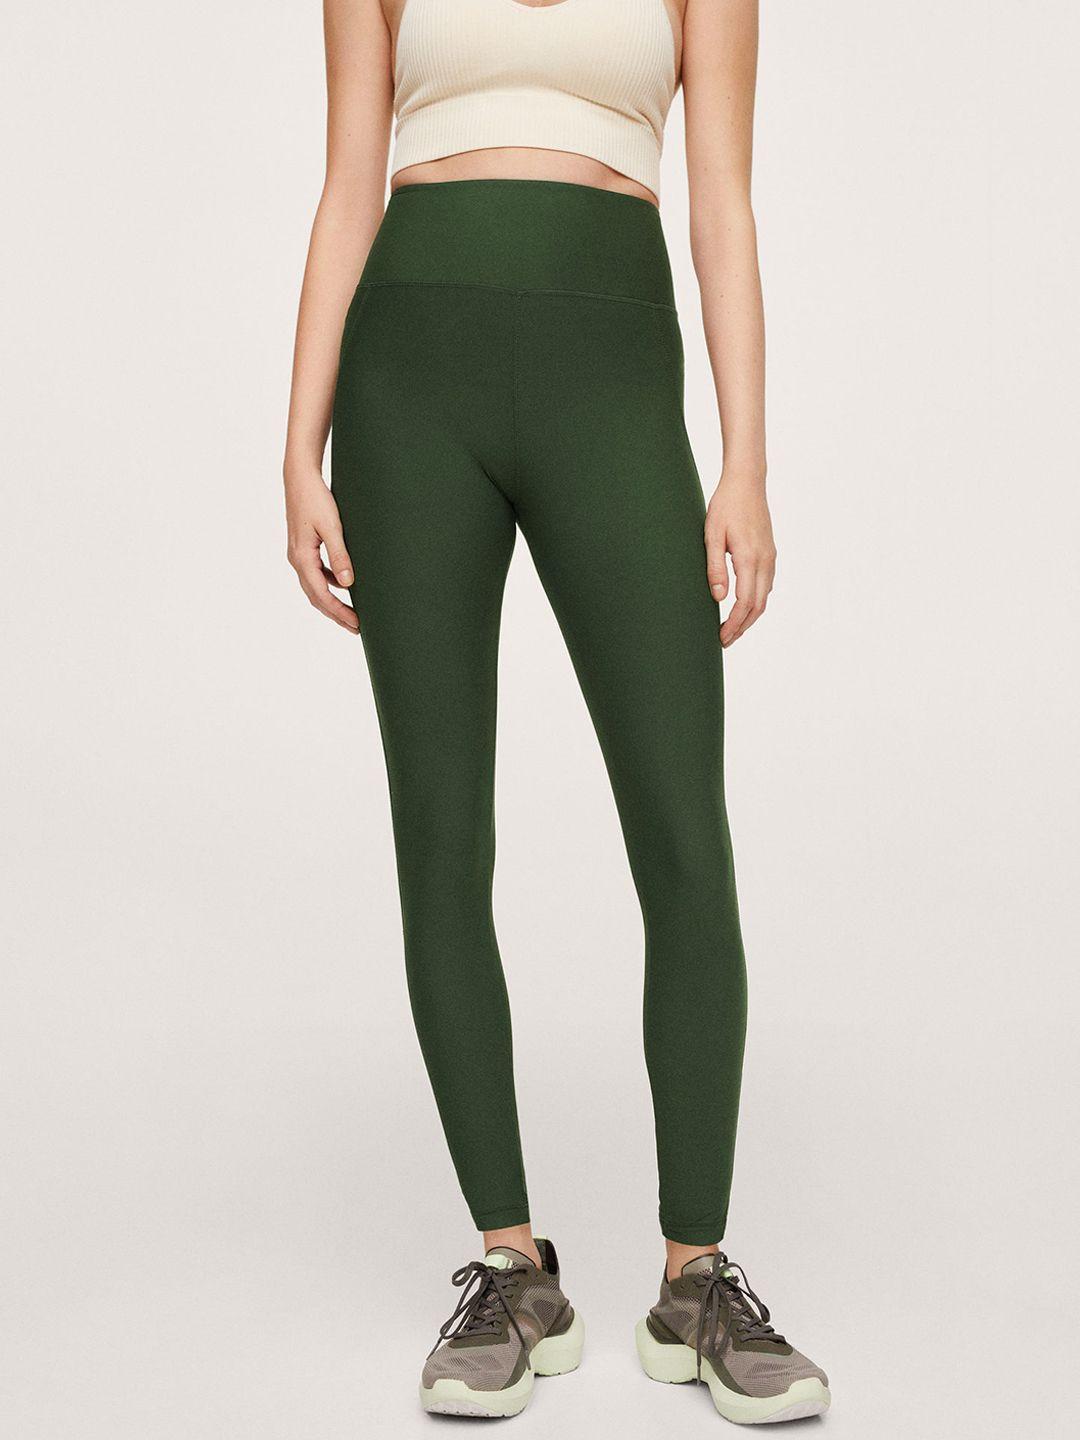 mango-women-olive-green-solid-high-rise-winter-training-crop-tights